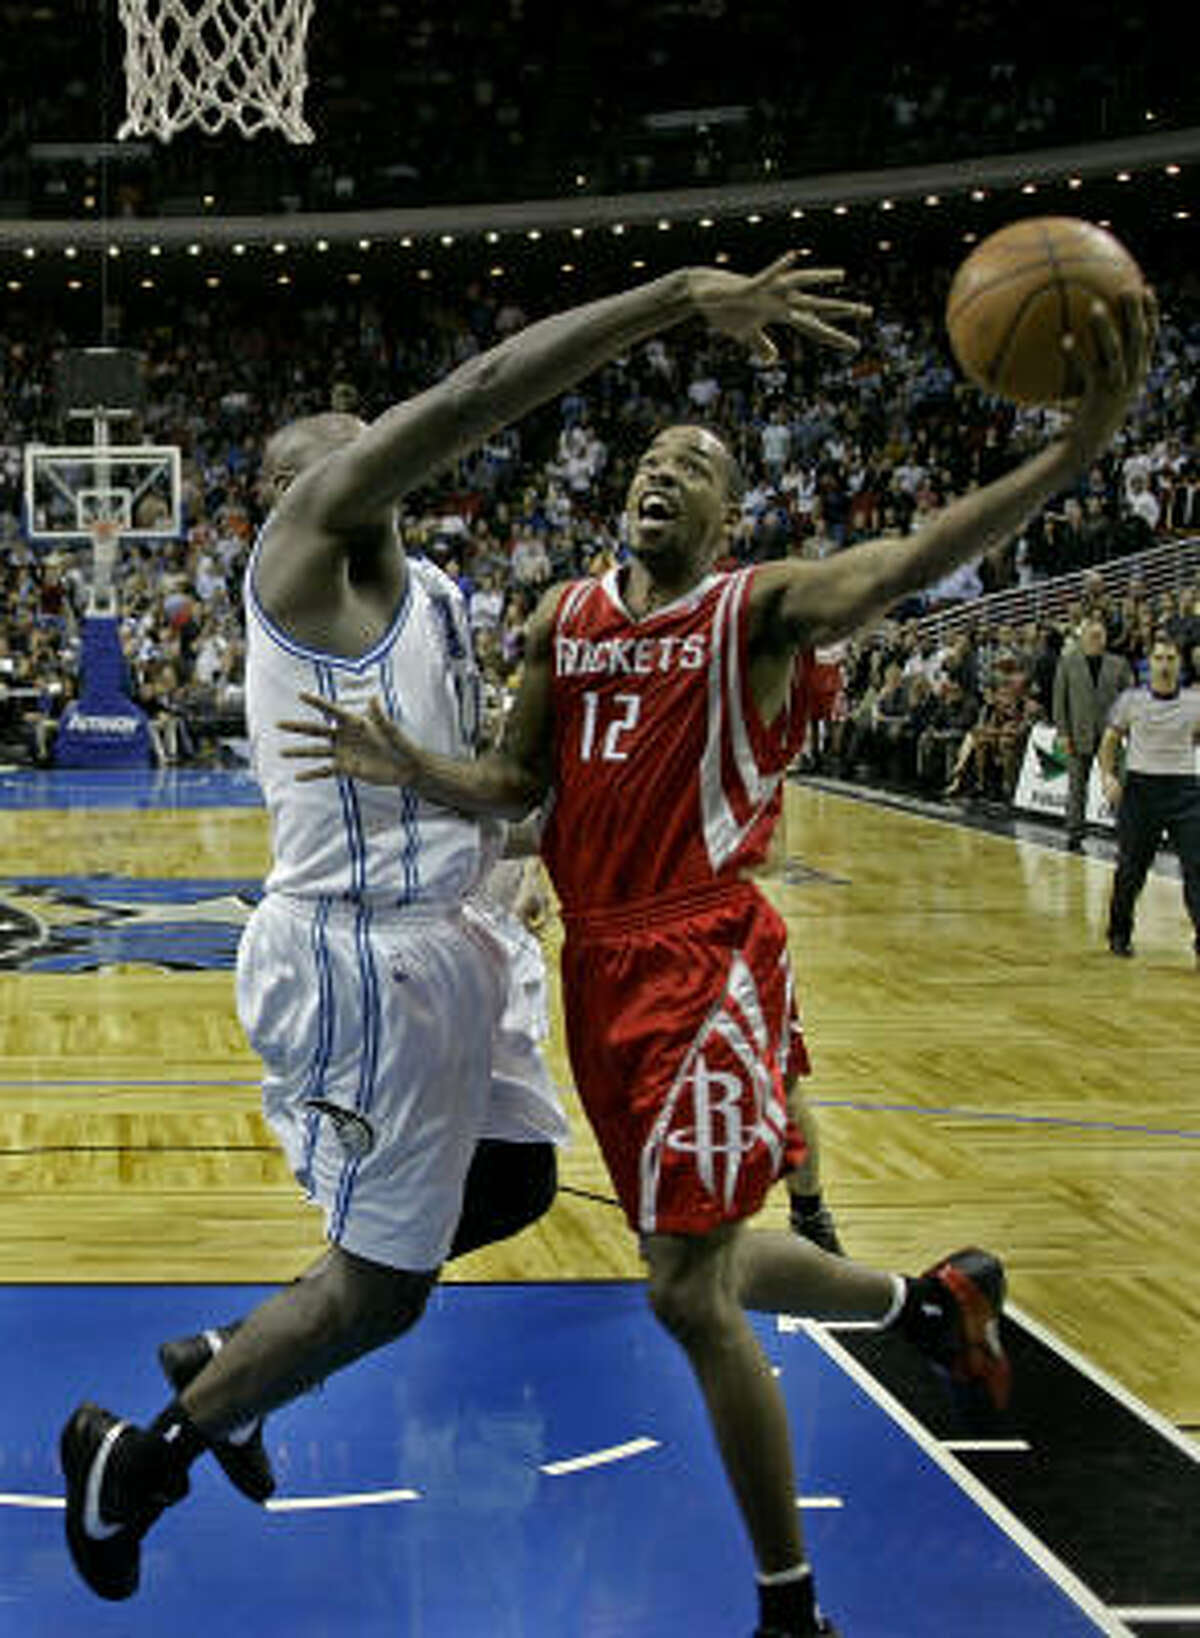 Rockets guard Rafer Alston (12) makes a shot over Magic center Adonal Foyle with 4.3 seconds left to help the Rockets escape Orlando with a 96-94 win Friday.